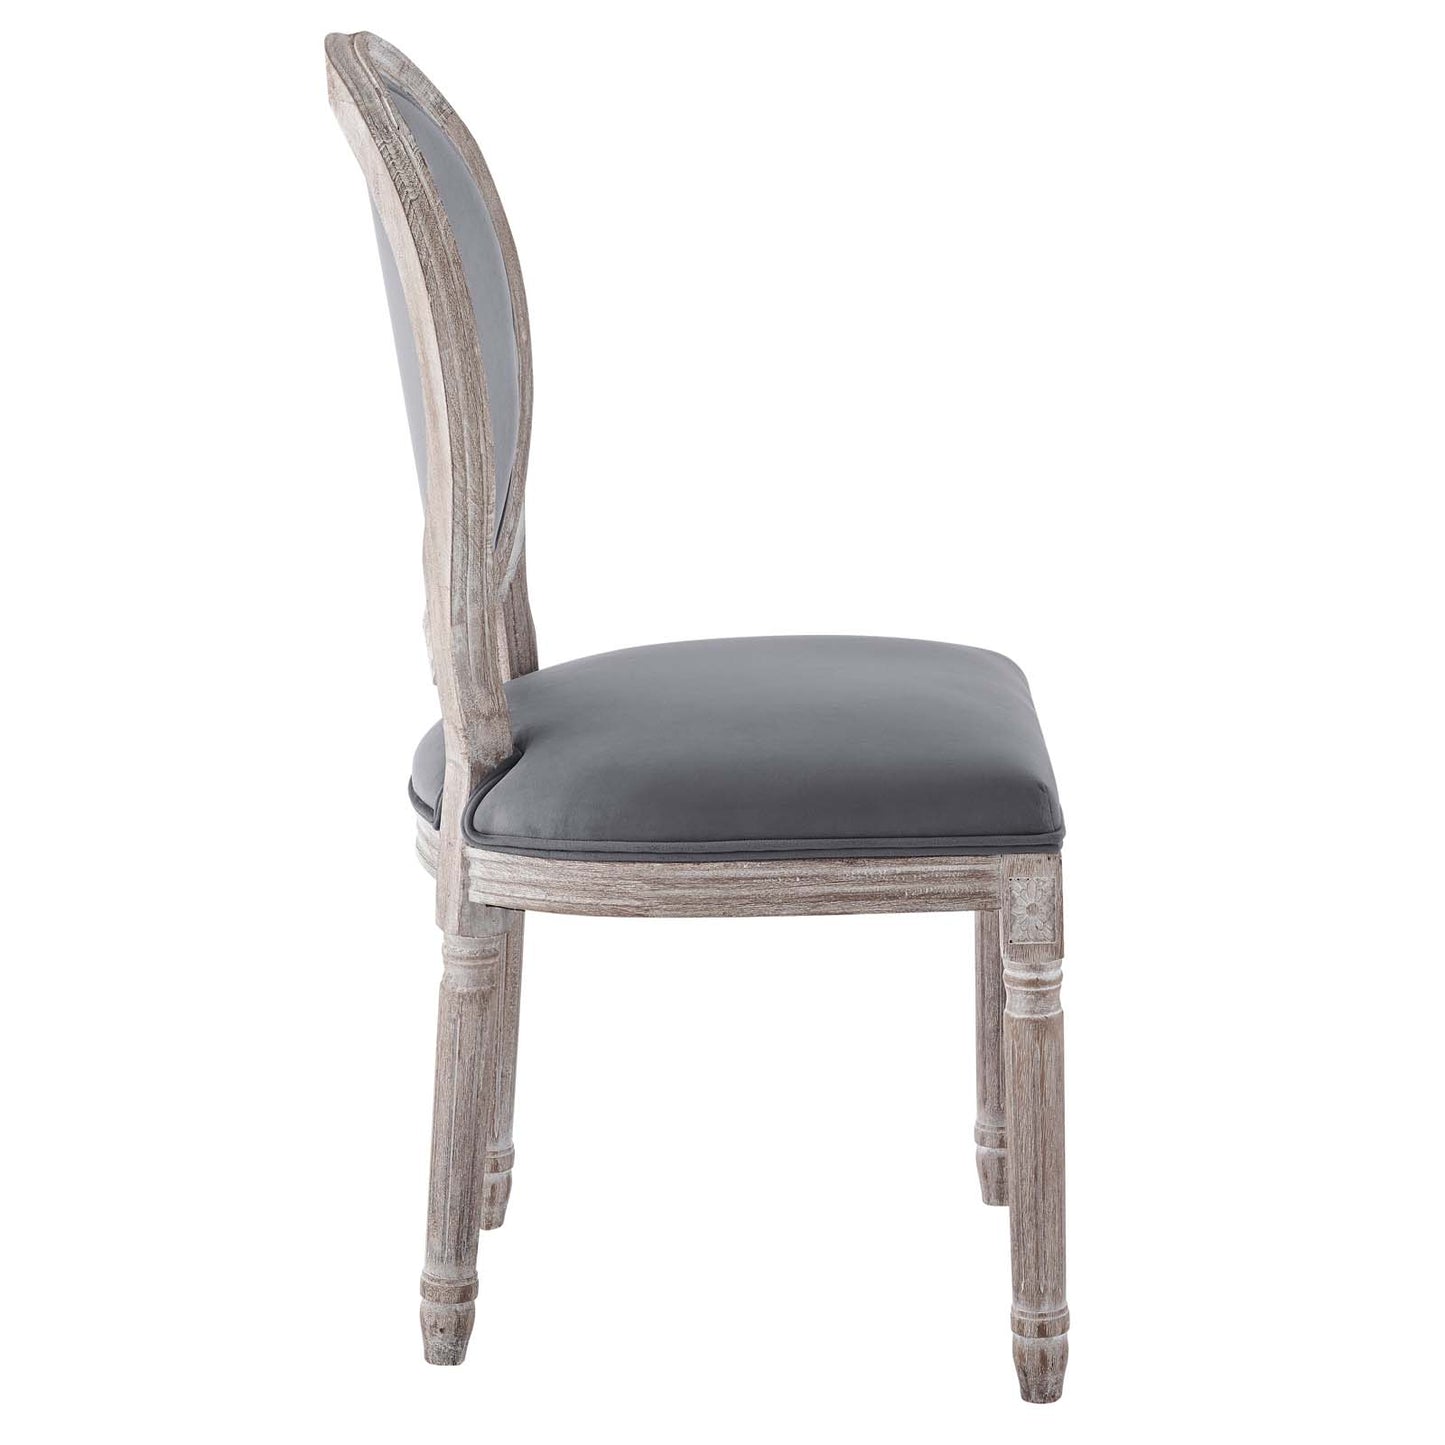 Emanate Vintage French Performance Velvet Dining Side Chair Natural Gray EEI-4668-NAT-GRY